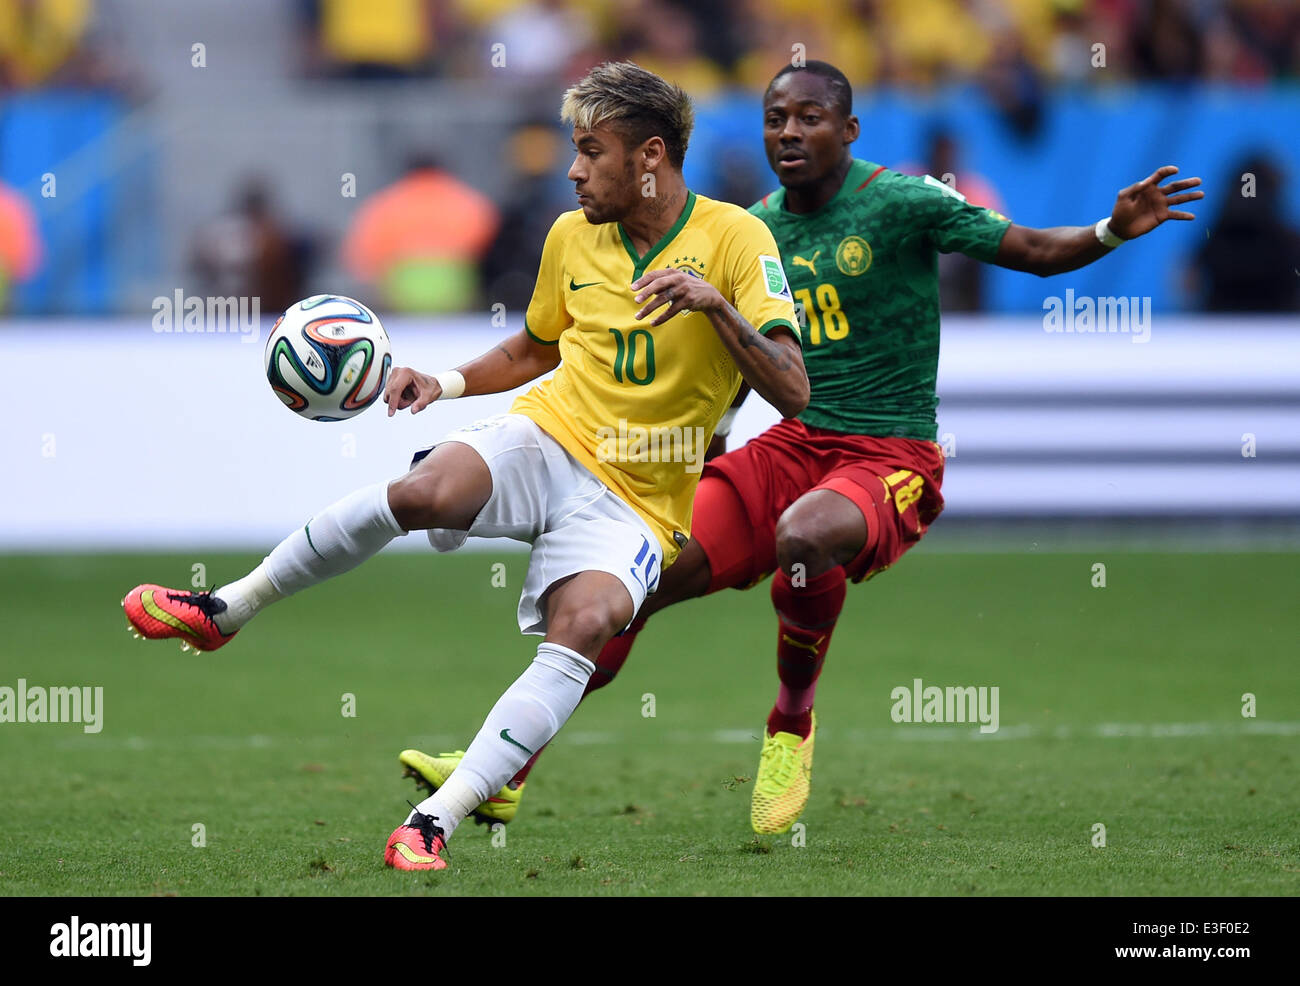 Brasilia, Brazil. 23rd June, 2014. Cameroon's Eyong Enoh (R) vies for the ball with Neymar of Brazil during the FIFA World Cup 2014 group A preliminary round match between Cameroon and Brazil at the Estadio Nacional in Brasilia, Brazil, 23 June 2014. Photo: Marius Becker/dpa/Alamy Live News Stock Photo